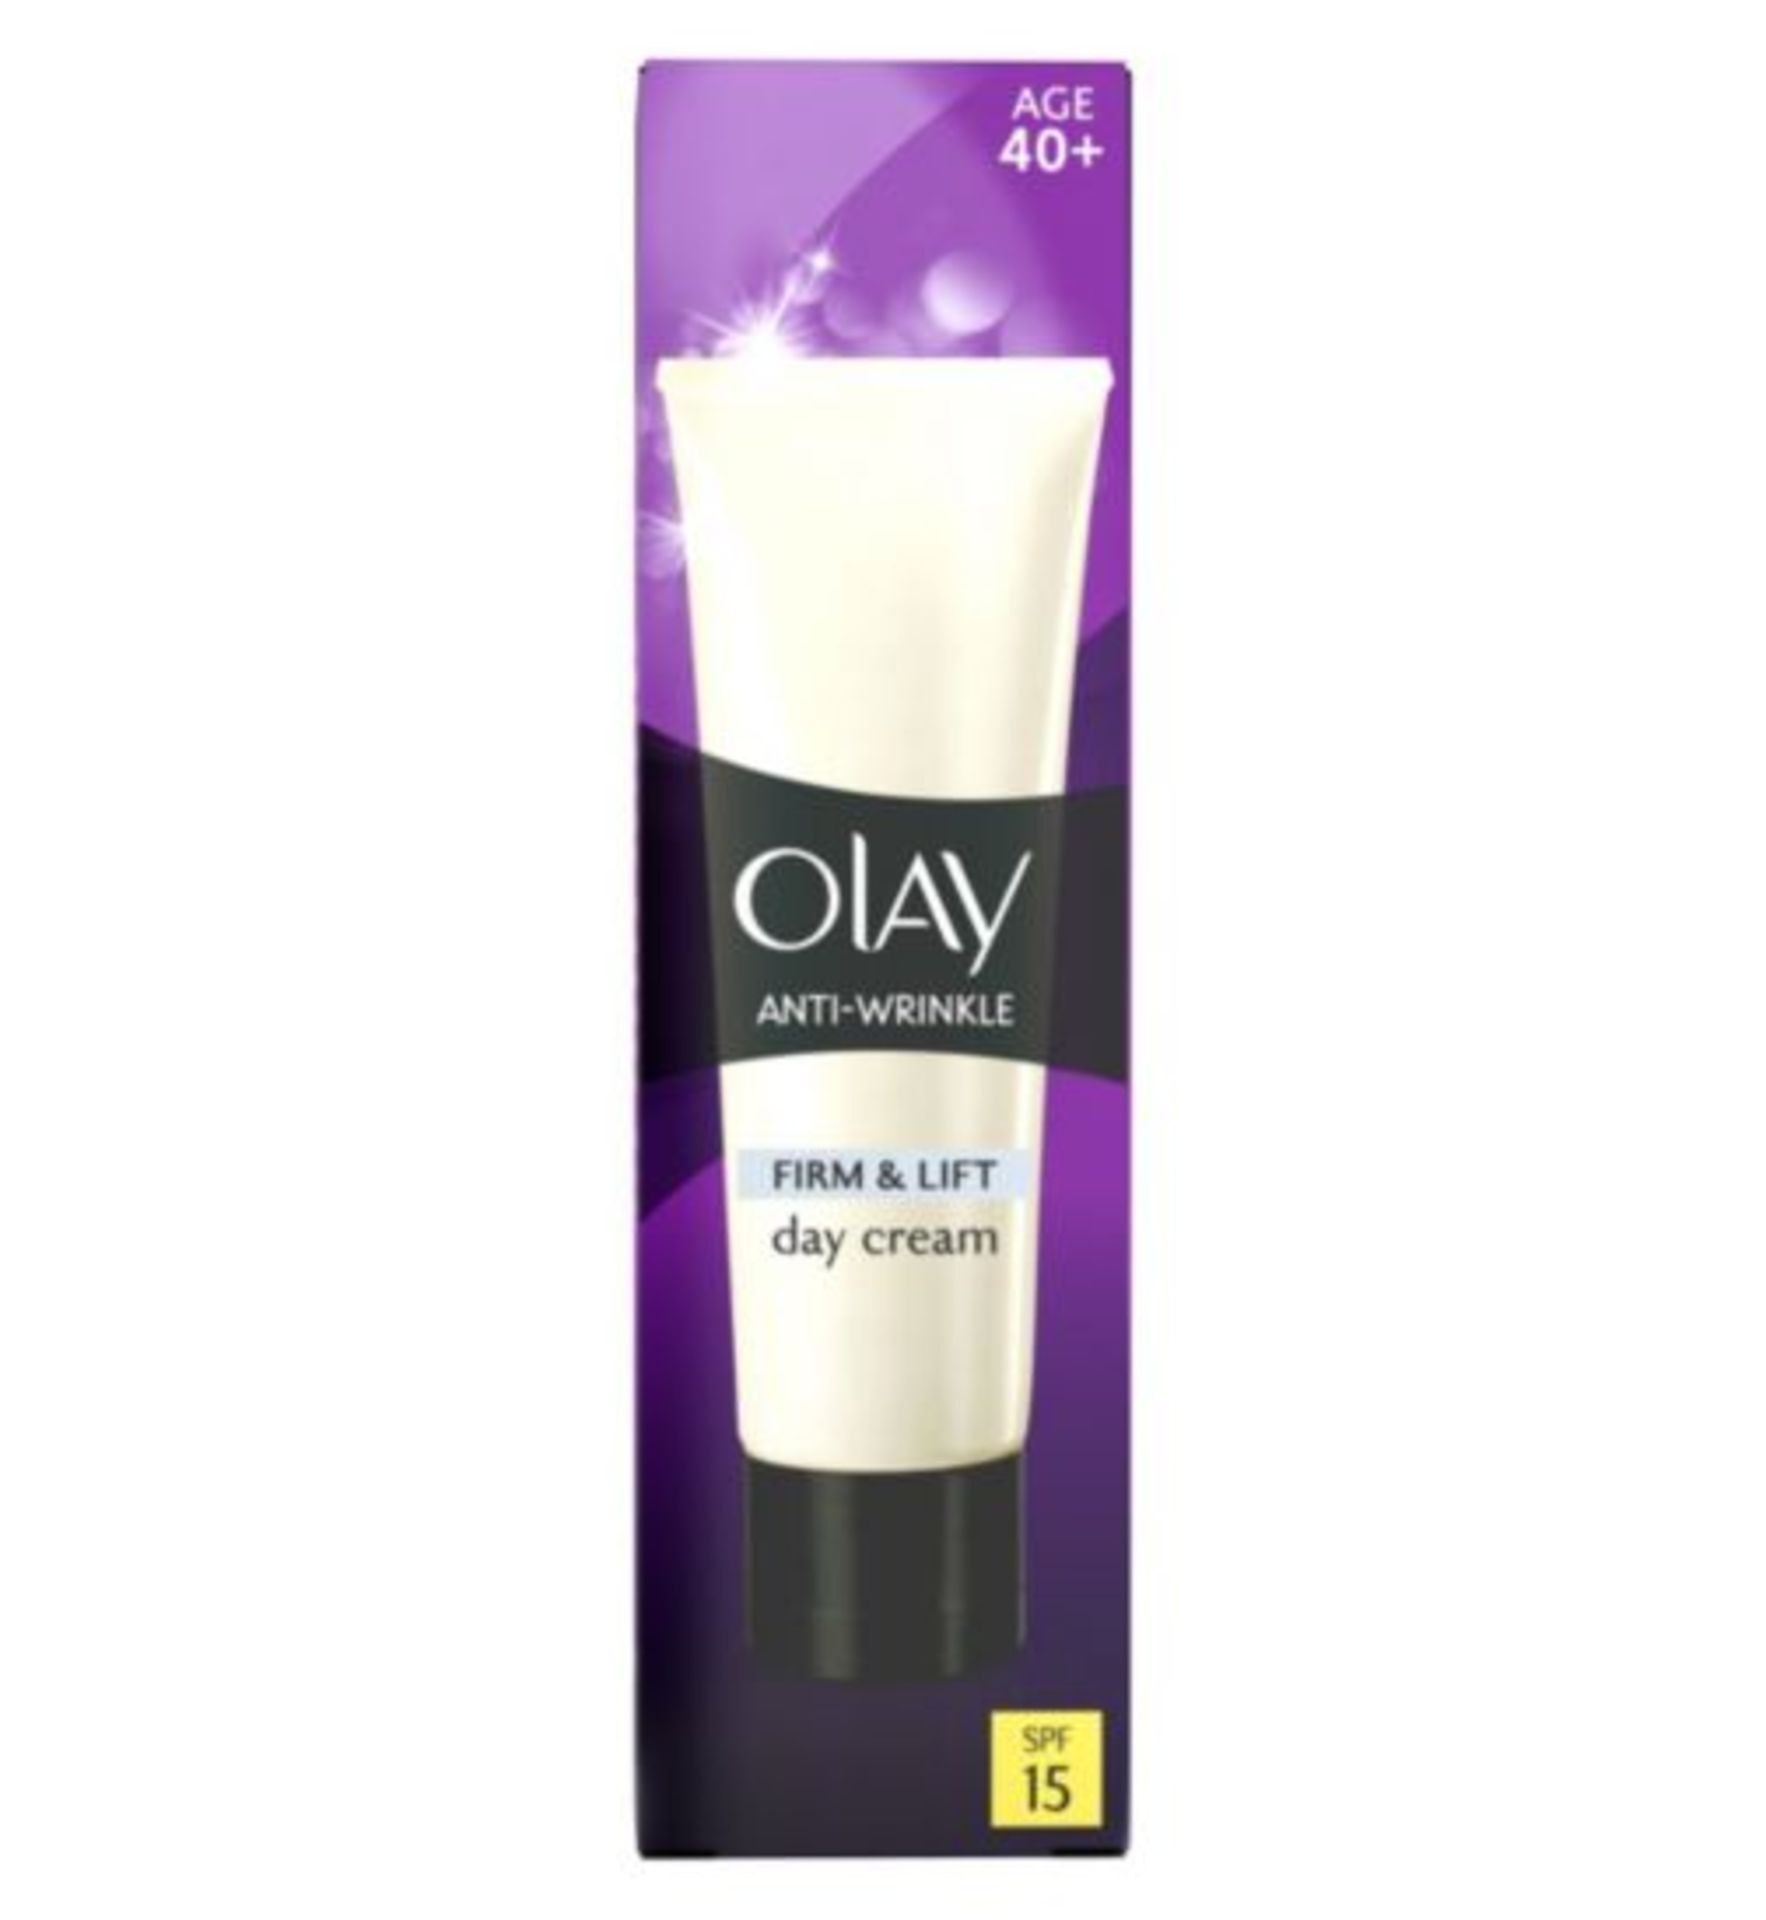 V Brand New Olay Anti-Wrinkle firm and lift day cream SPF 15 Aged 40+ X 2 Bid price to be multiplied